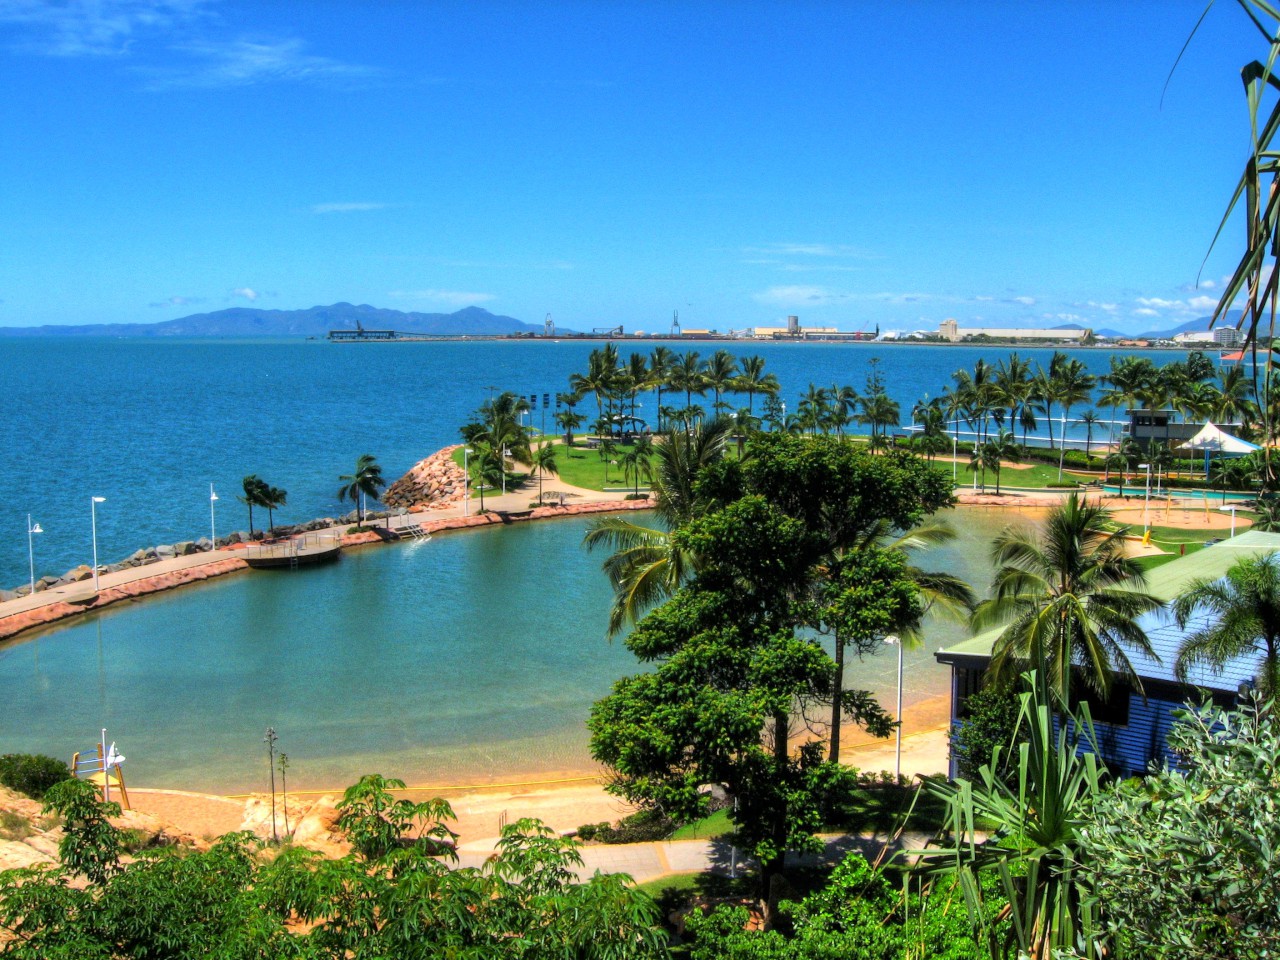 Townsville Image 8